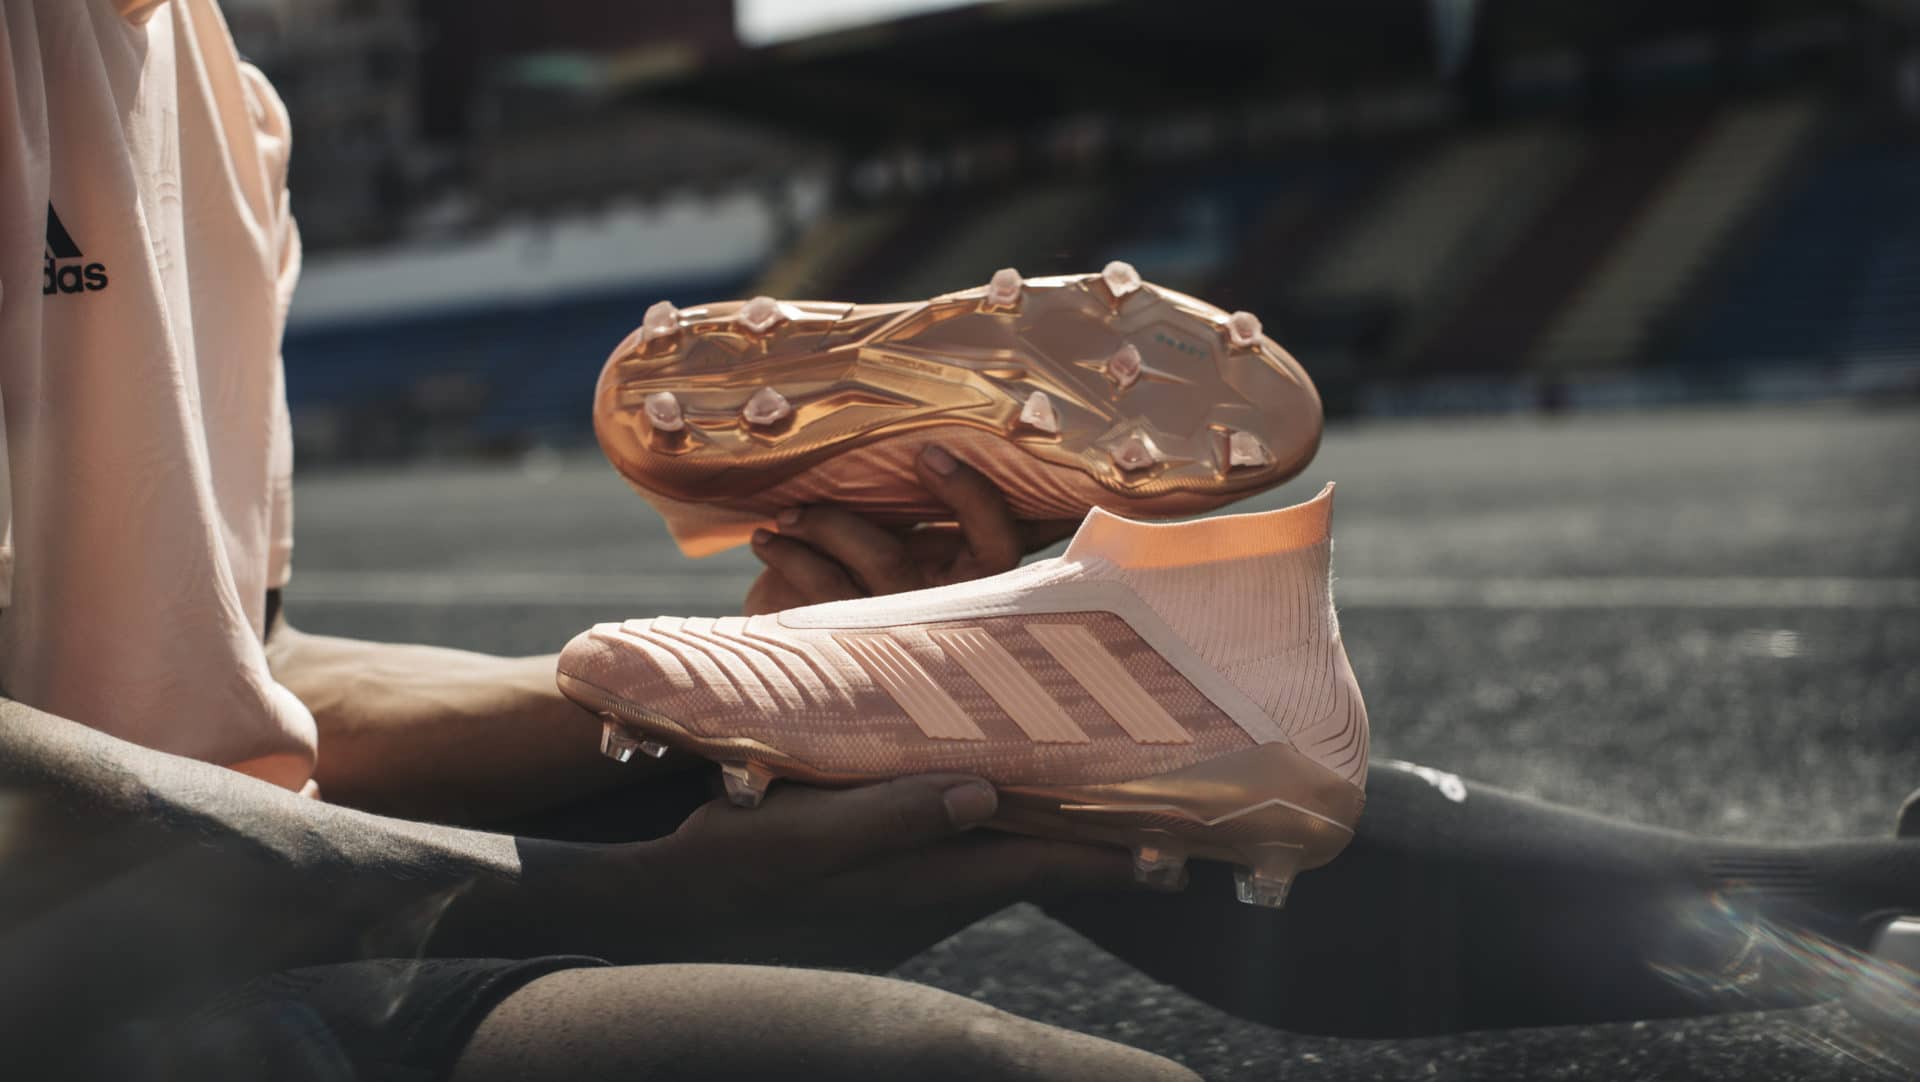 adidas spectral mode pink